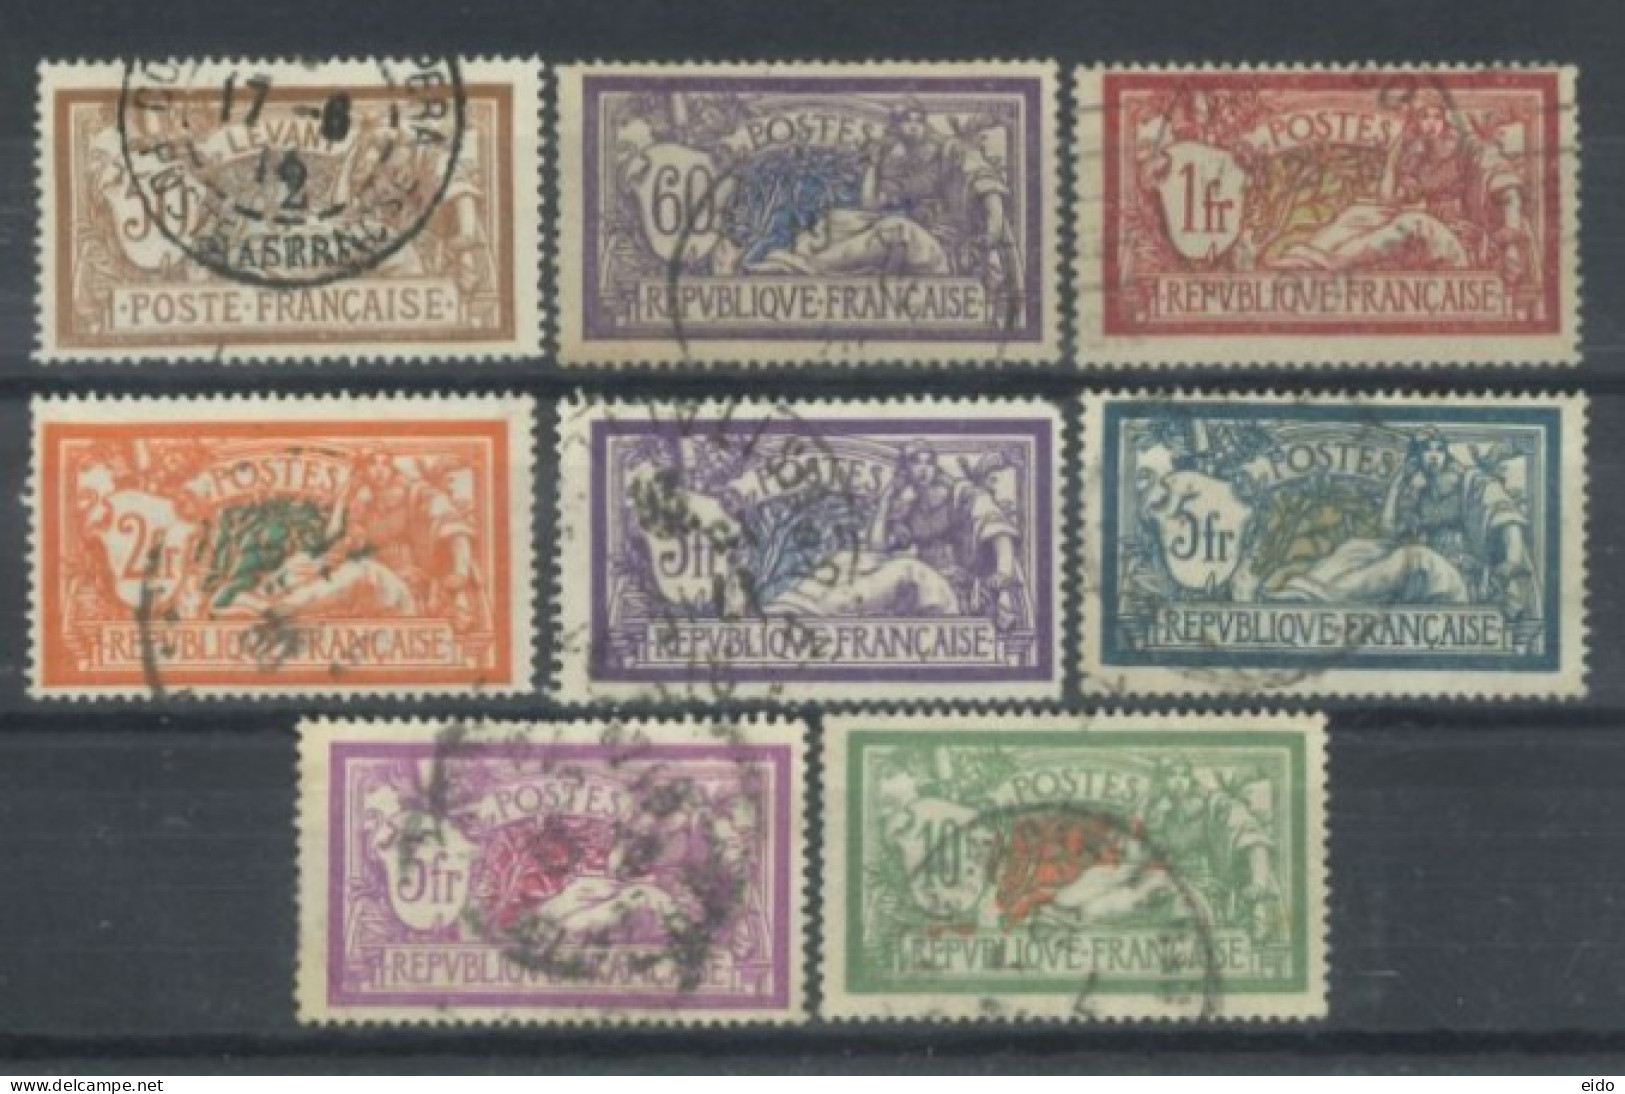 FRANCE.- 1900/26, MERSON STAMPS SET OF 8, USED. - 1900-27 Merson